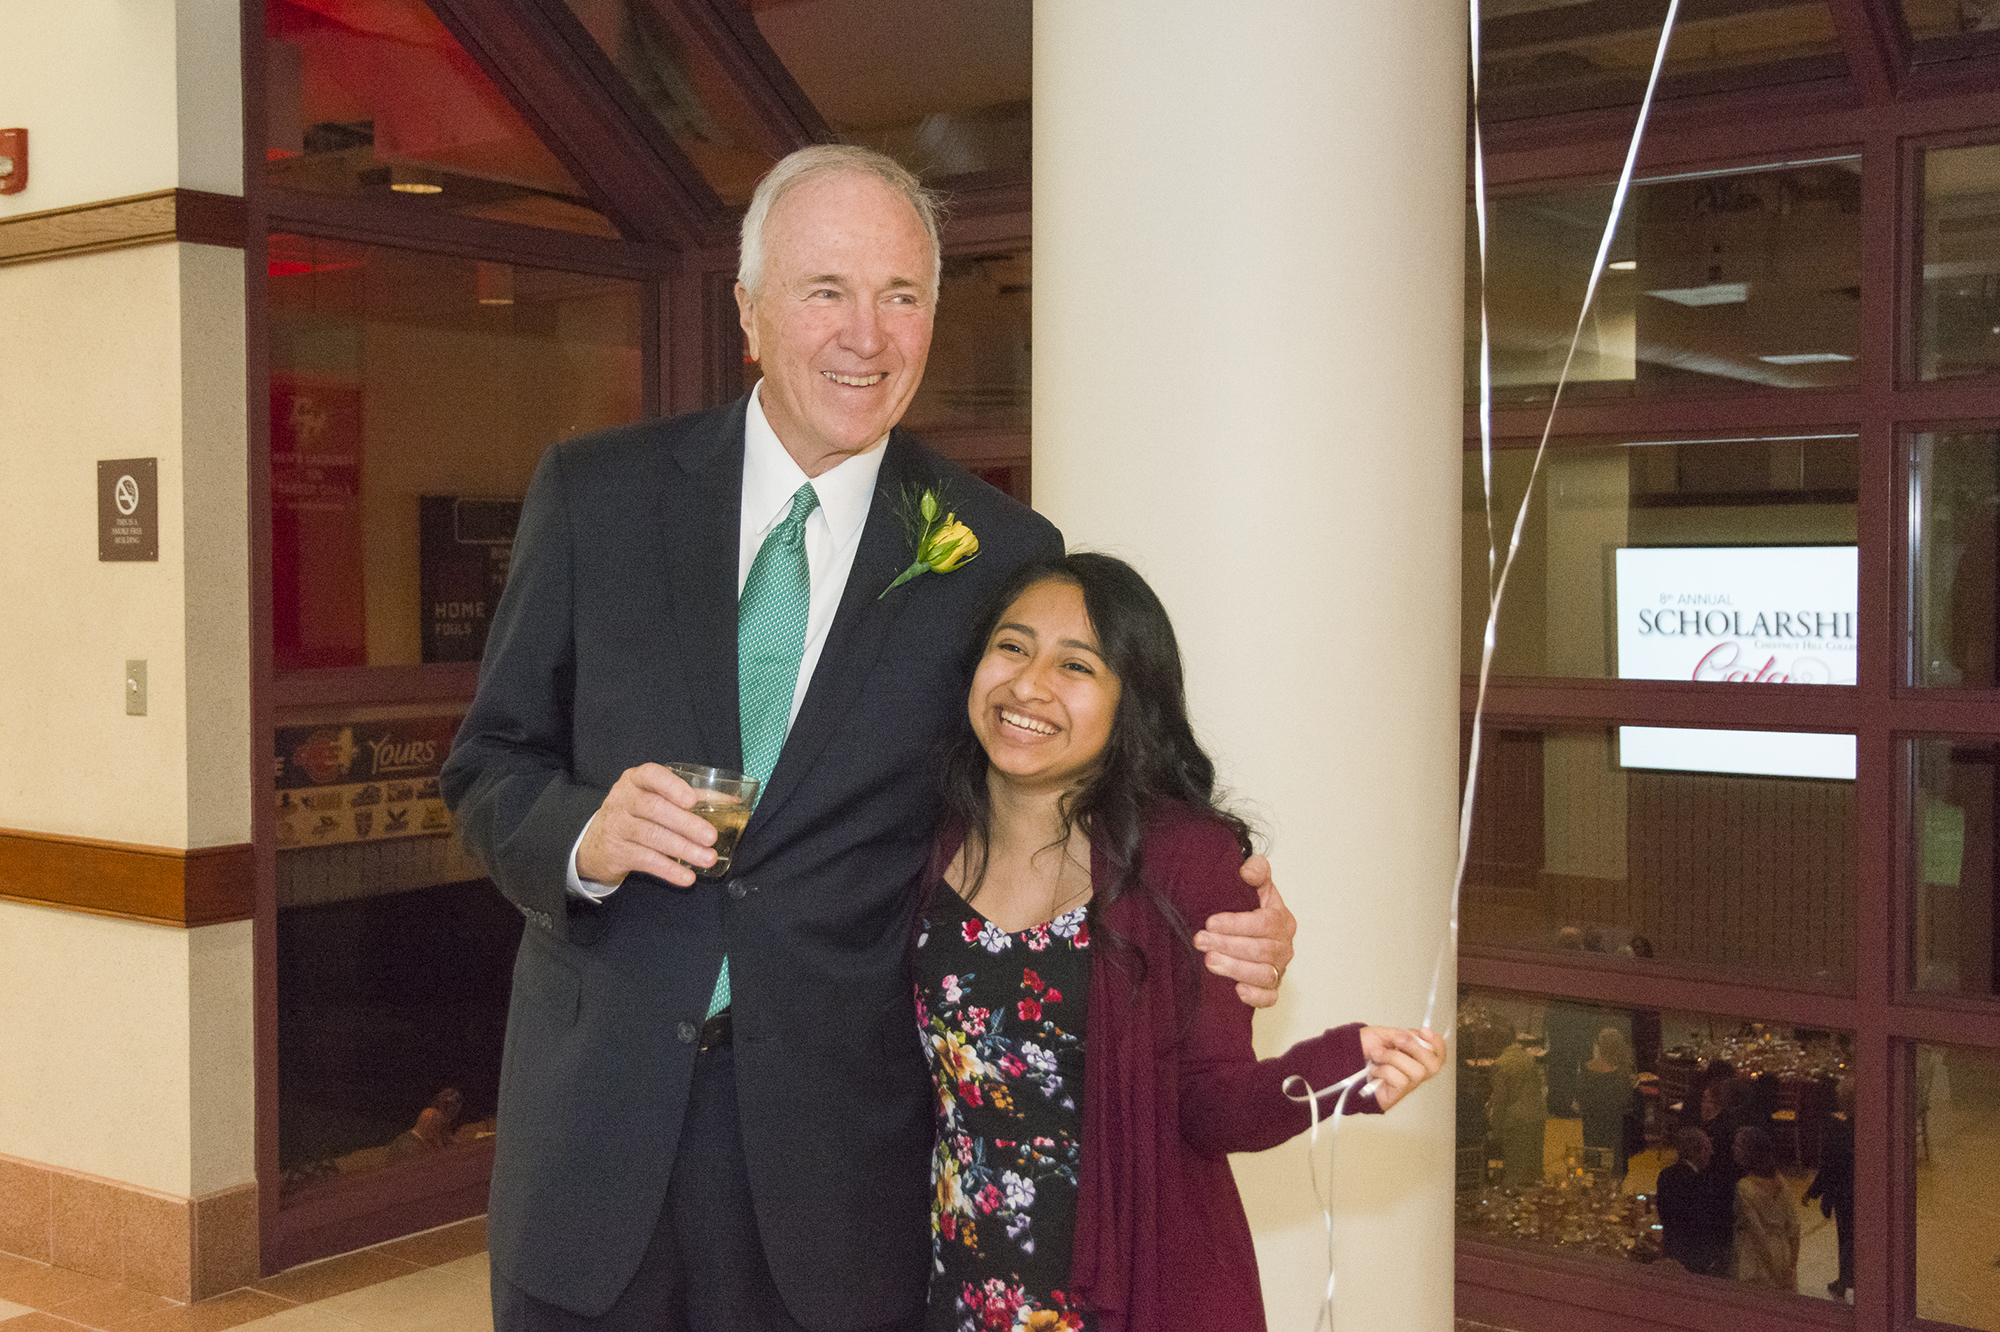 James Gallagher, Ph.D., and Carolina Perez '20, recipient of the James P. & Anne Gallagher Endowed Scholarship, are all smiles at the Gala.